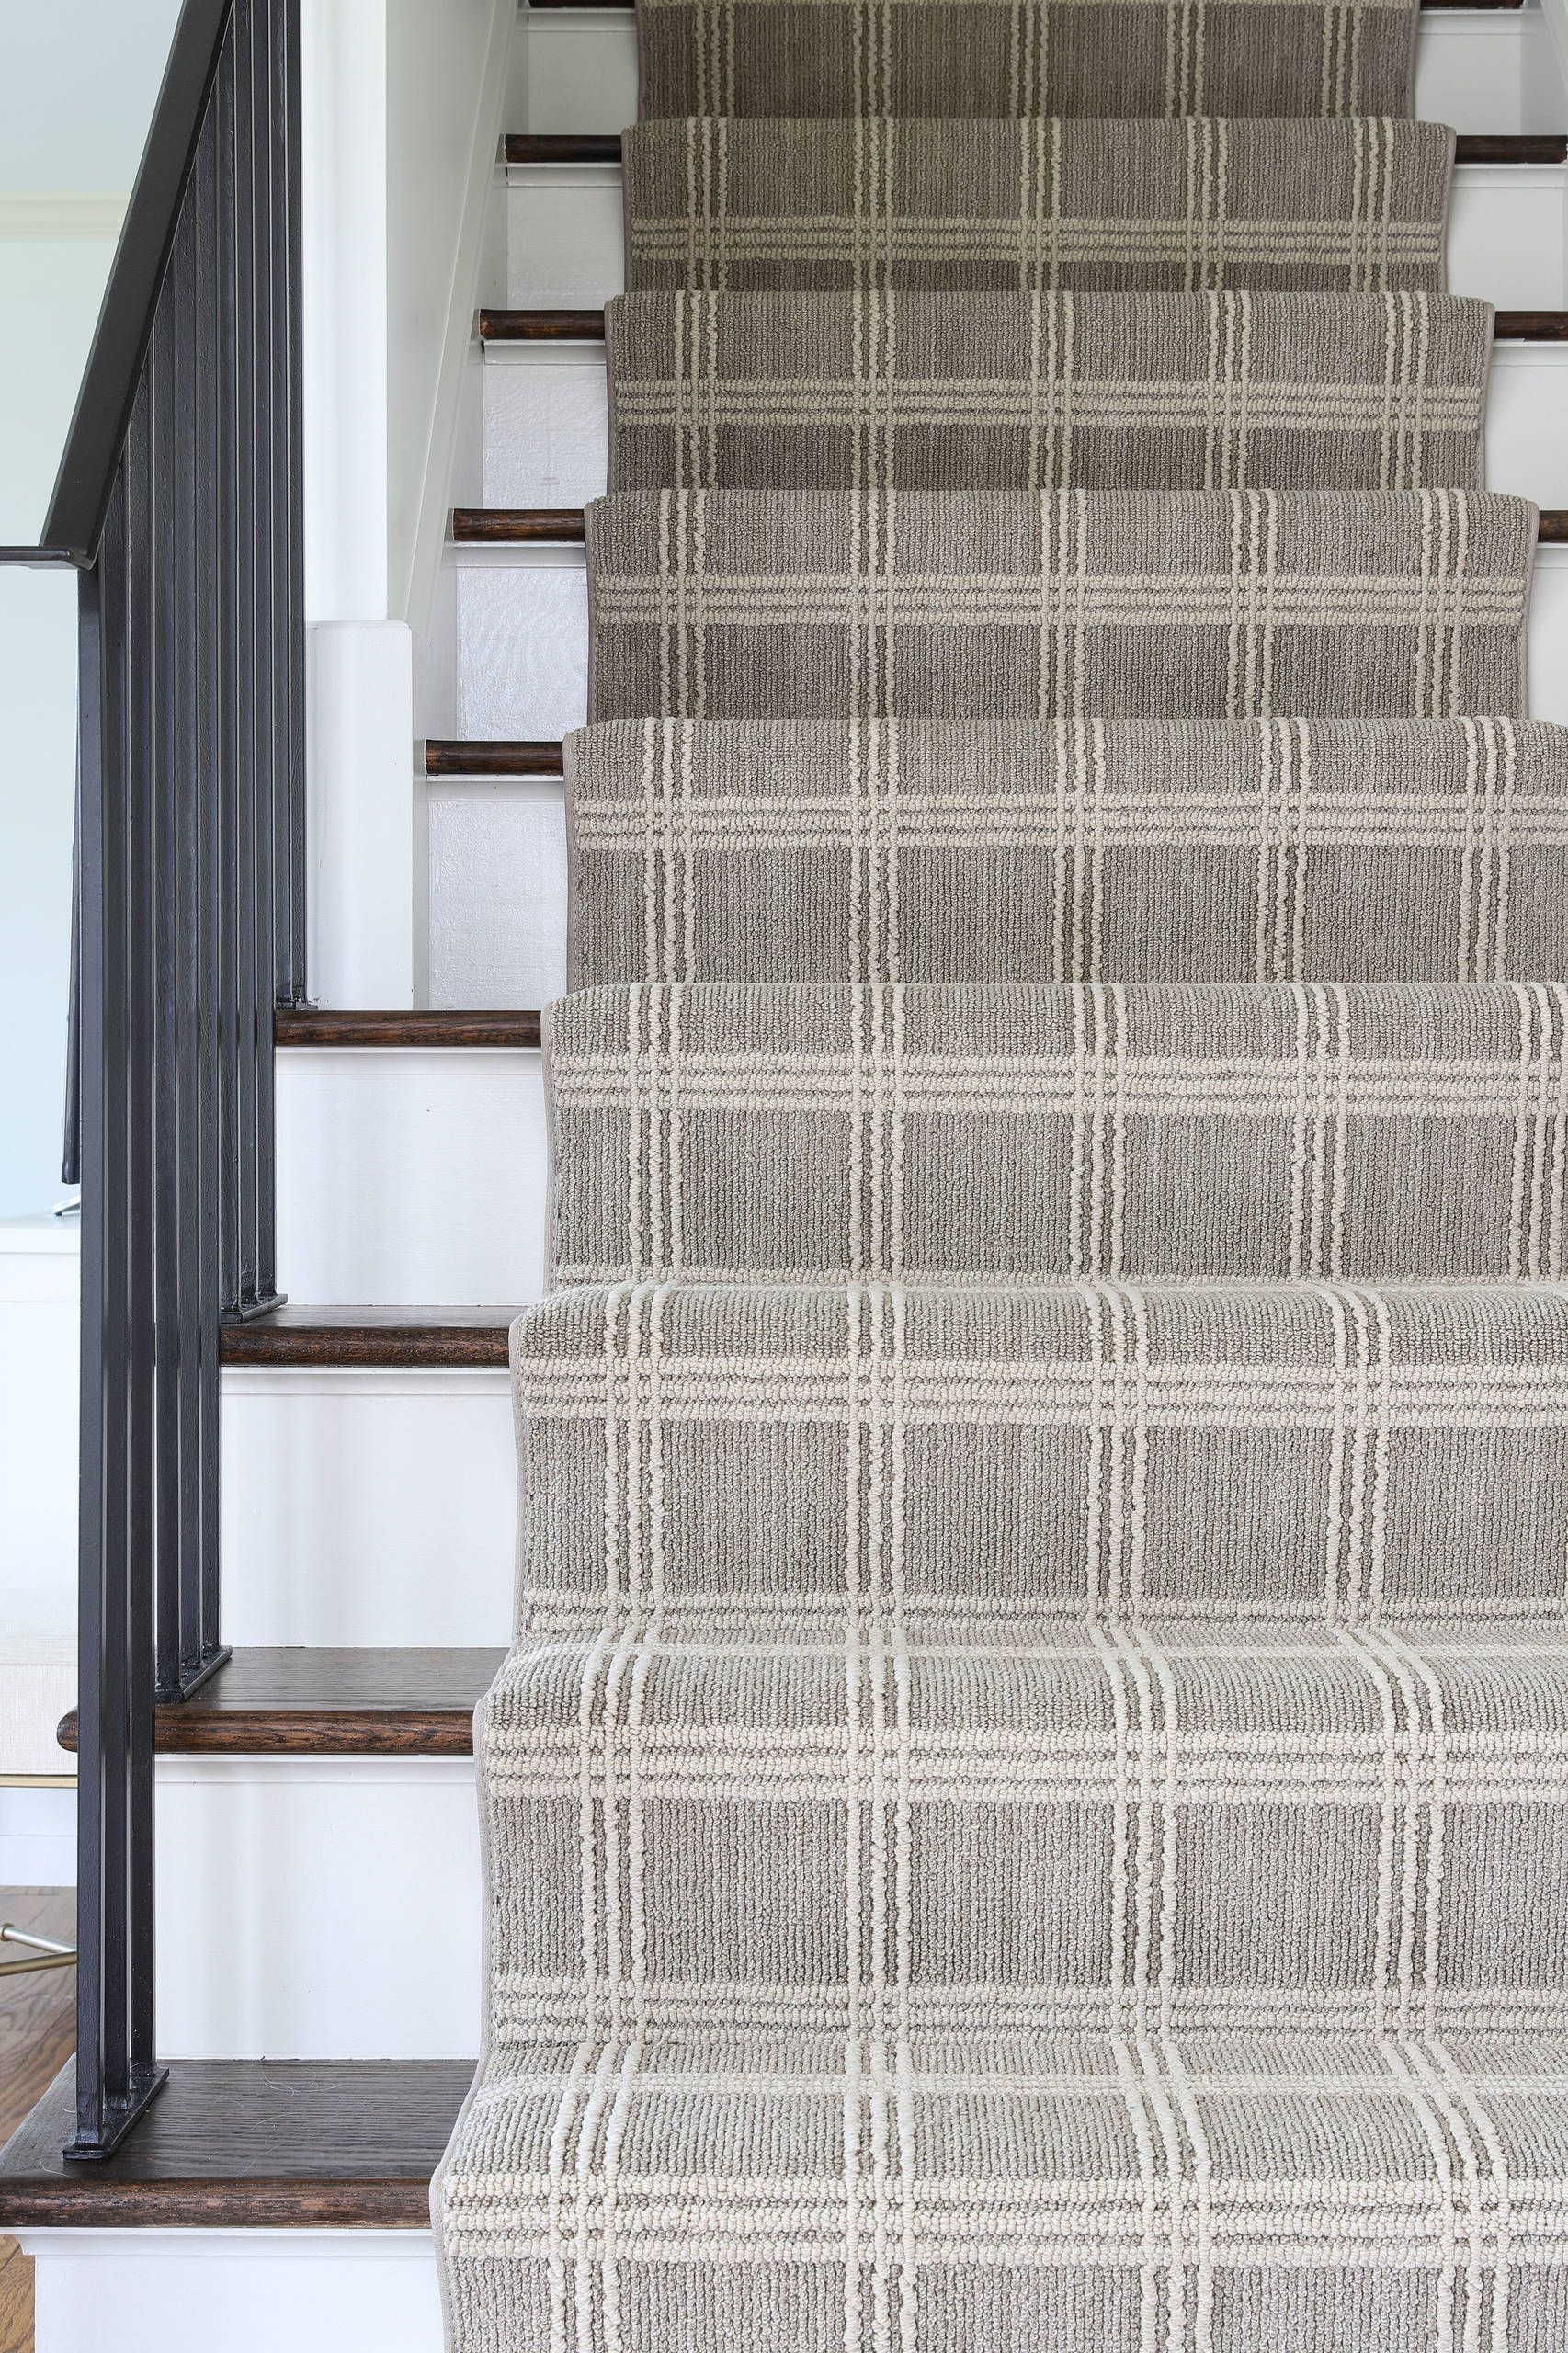 75 Beautiful Carpeted Staircase Pictures & Ideas | Houzz